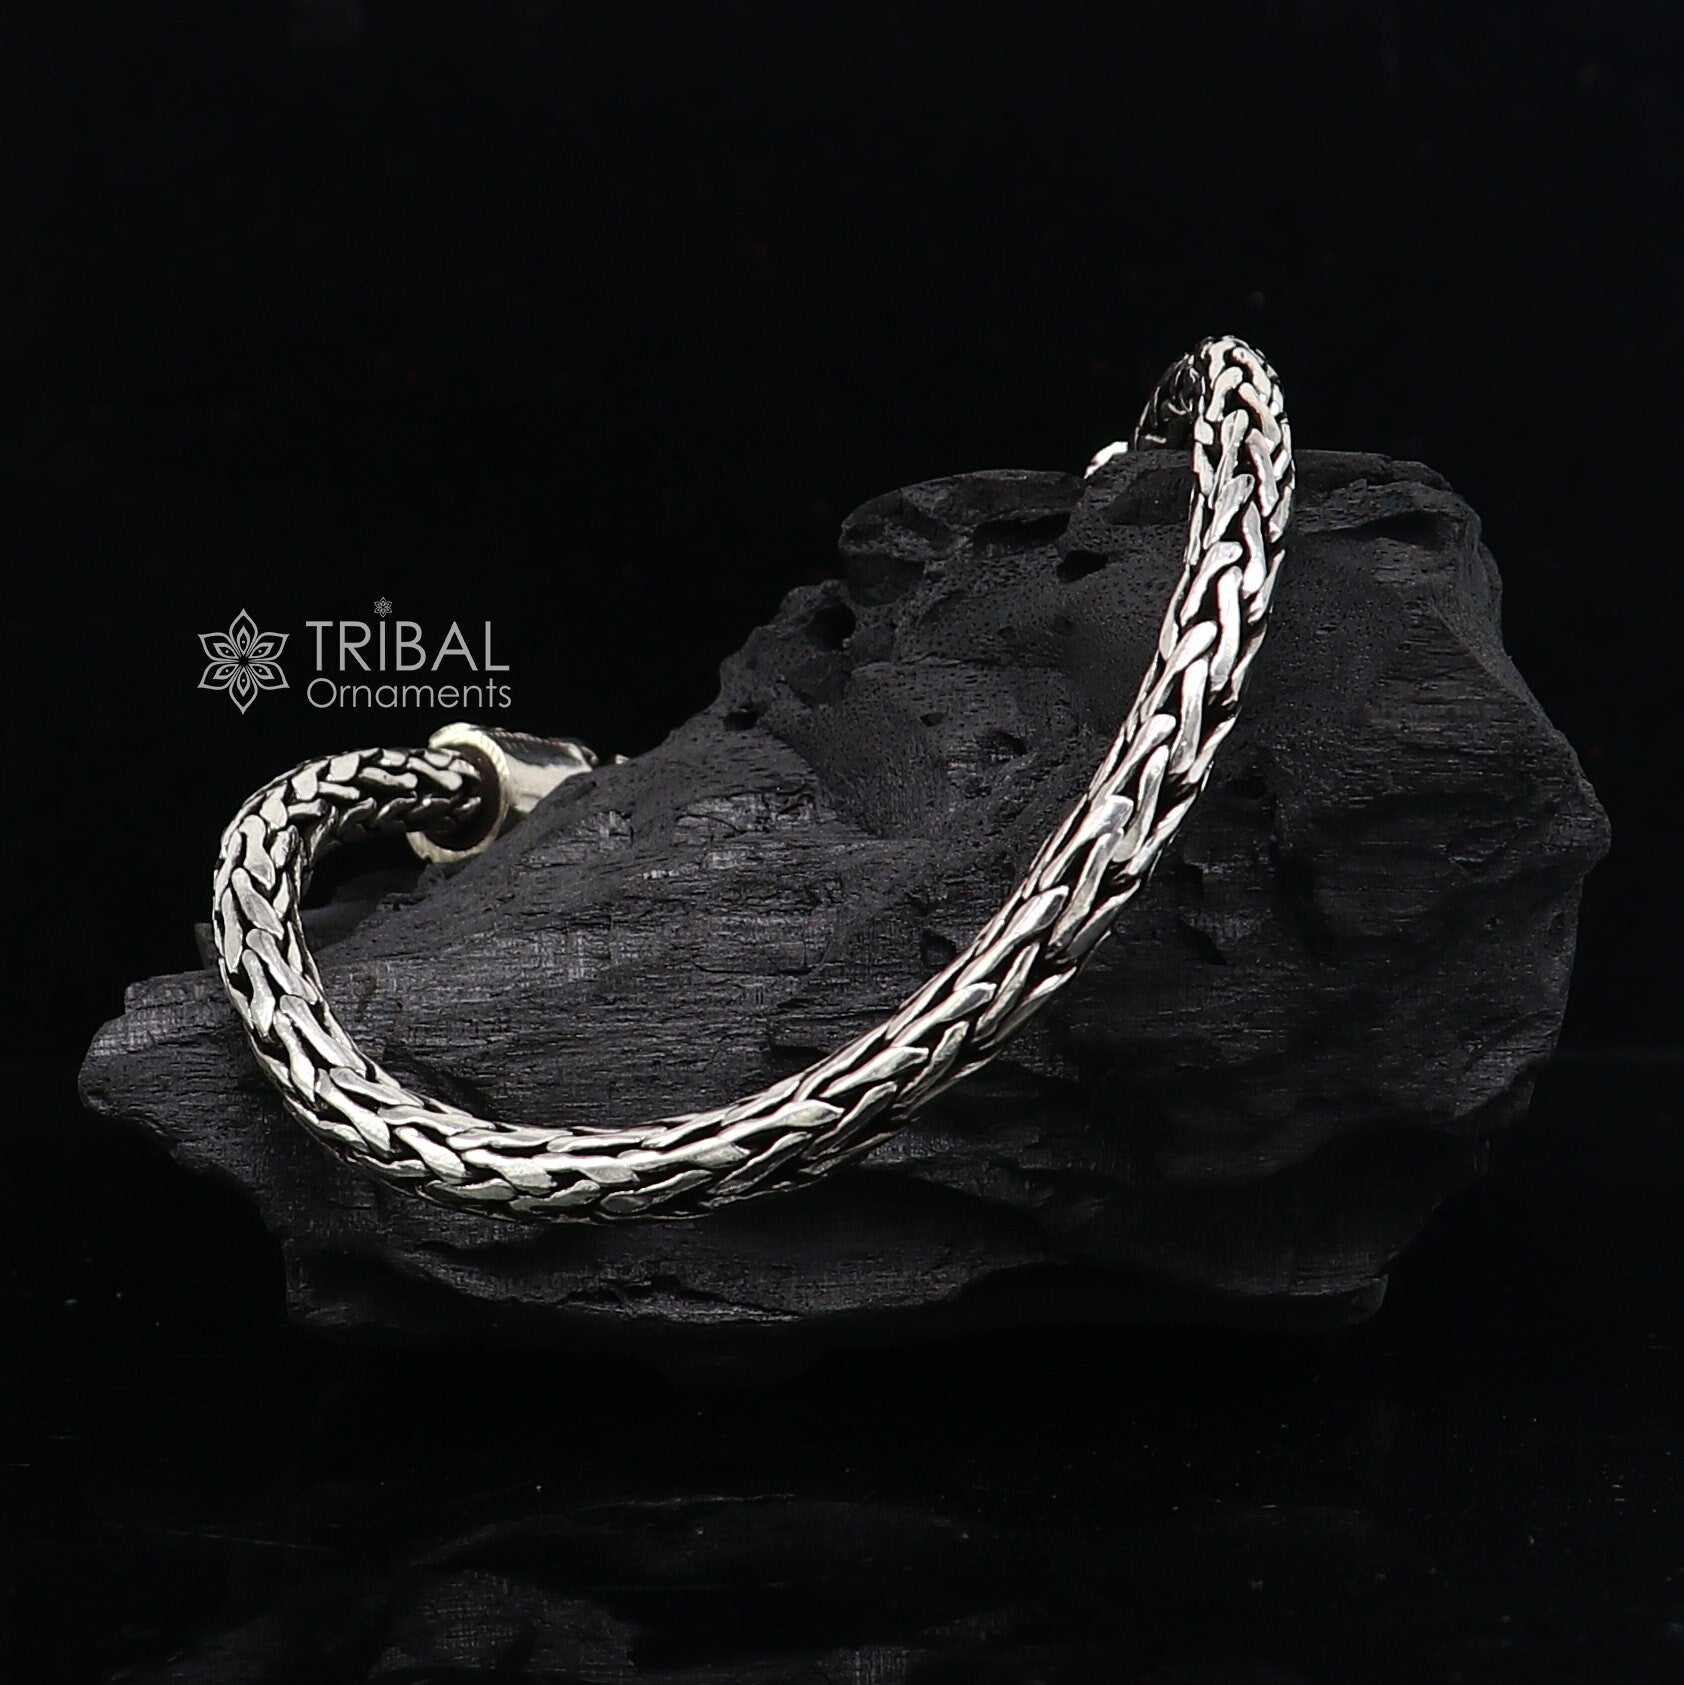 8" inches 925 sterling silver handmade stylish oxidized wheat chain bracelet customized design gorgeous personalized gifting jewelry sbr704 - TRIBAL ORNAMENTS